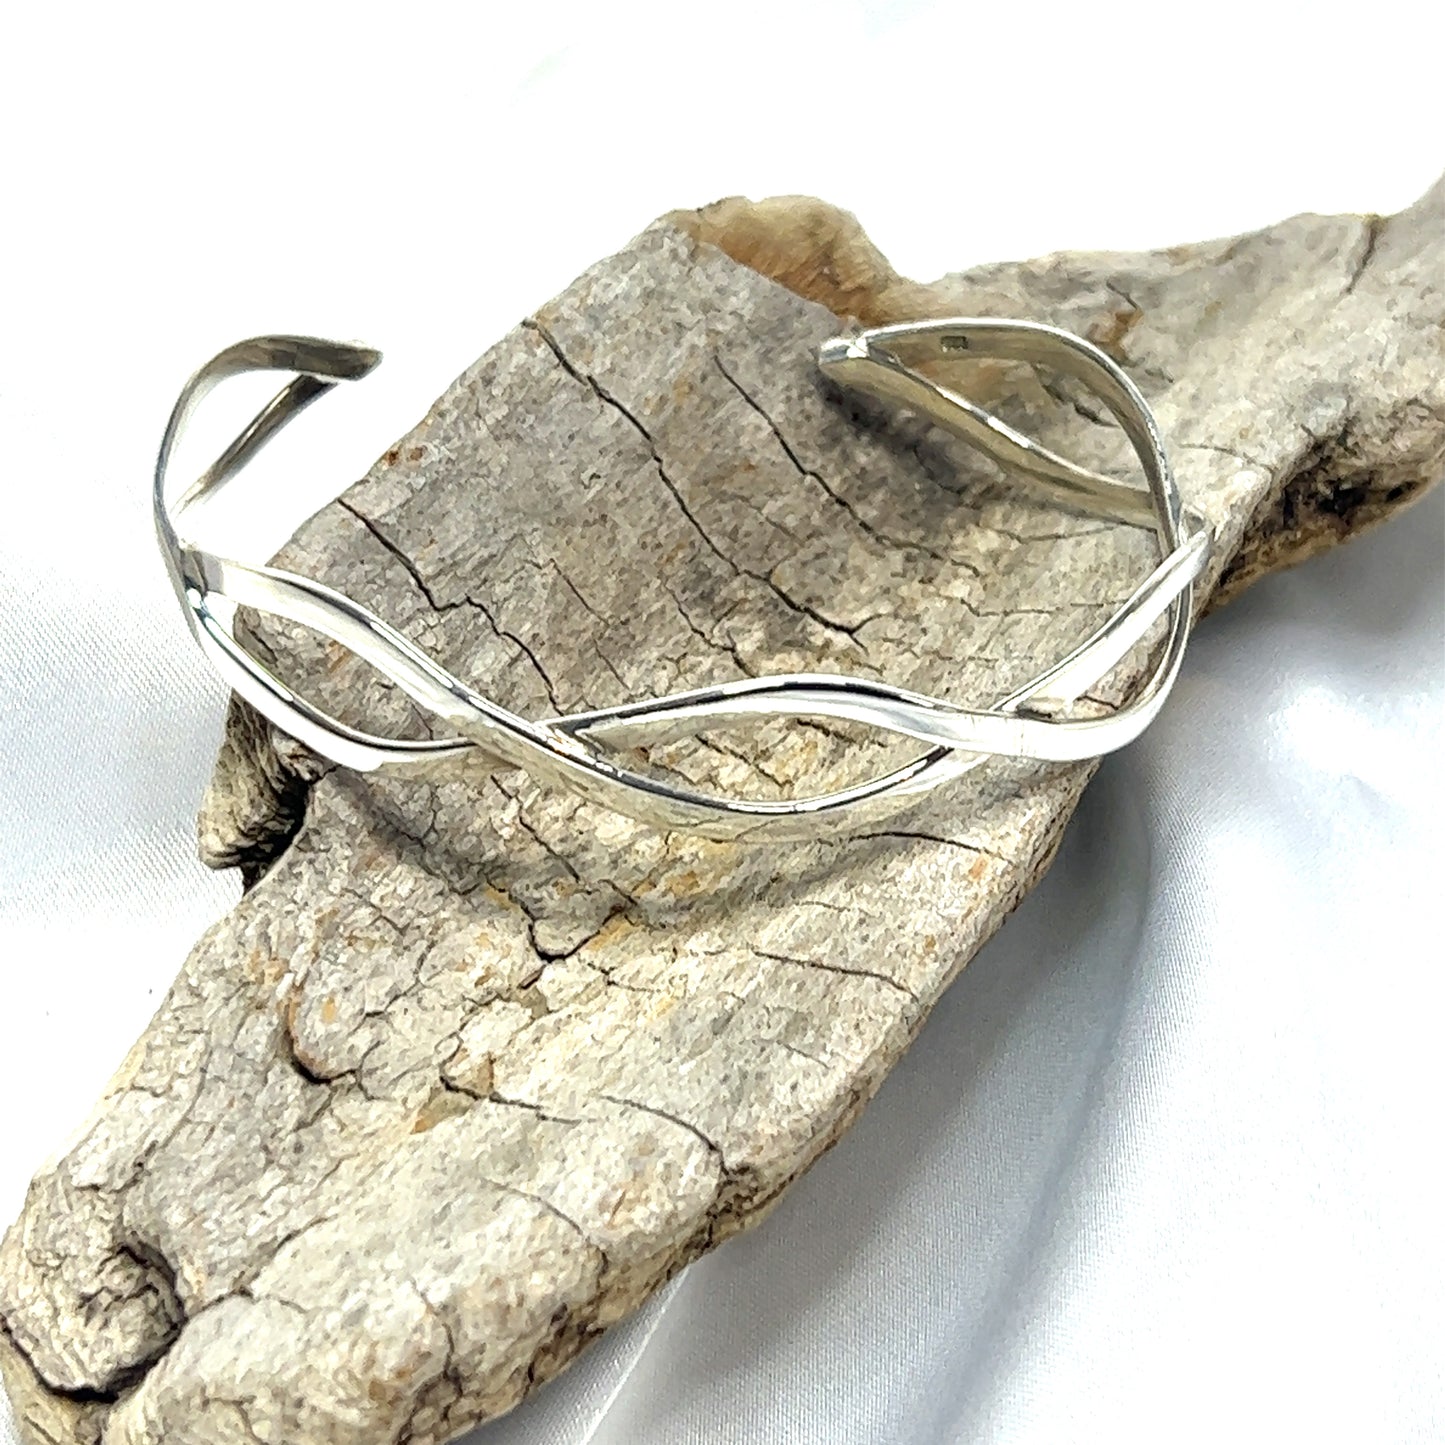 
                  
                    A Super Silver Stylish Twisted Silver Cuff bracelet with a twisting pattern, resting on a piece of wood.
                  
                